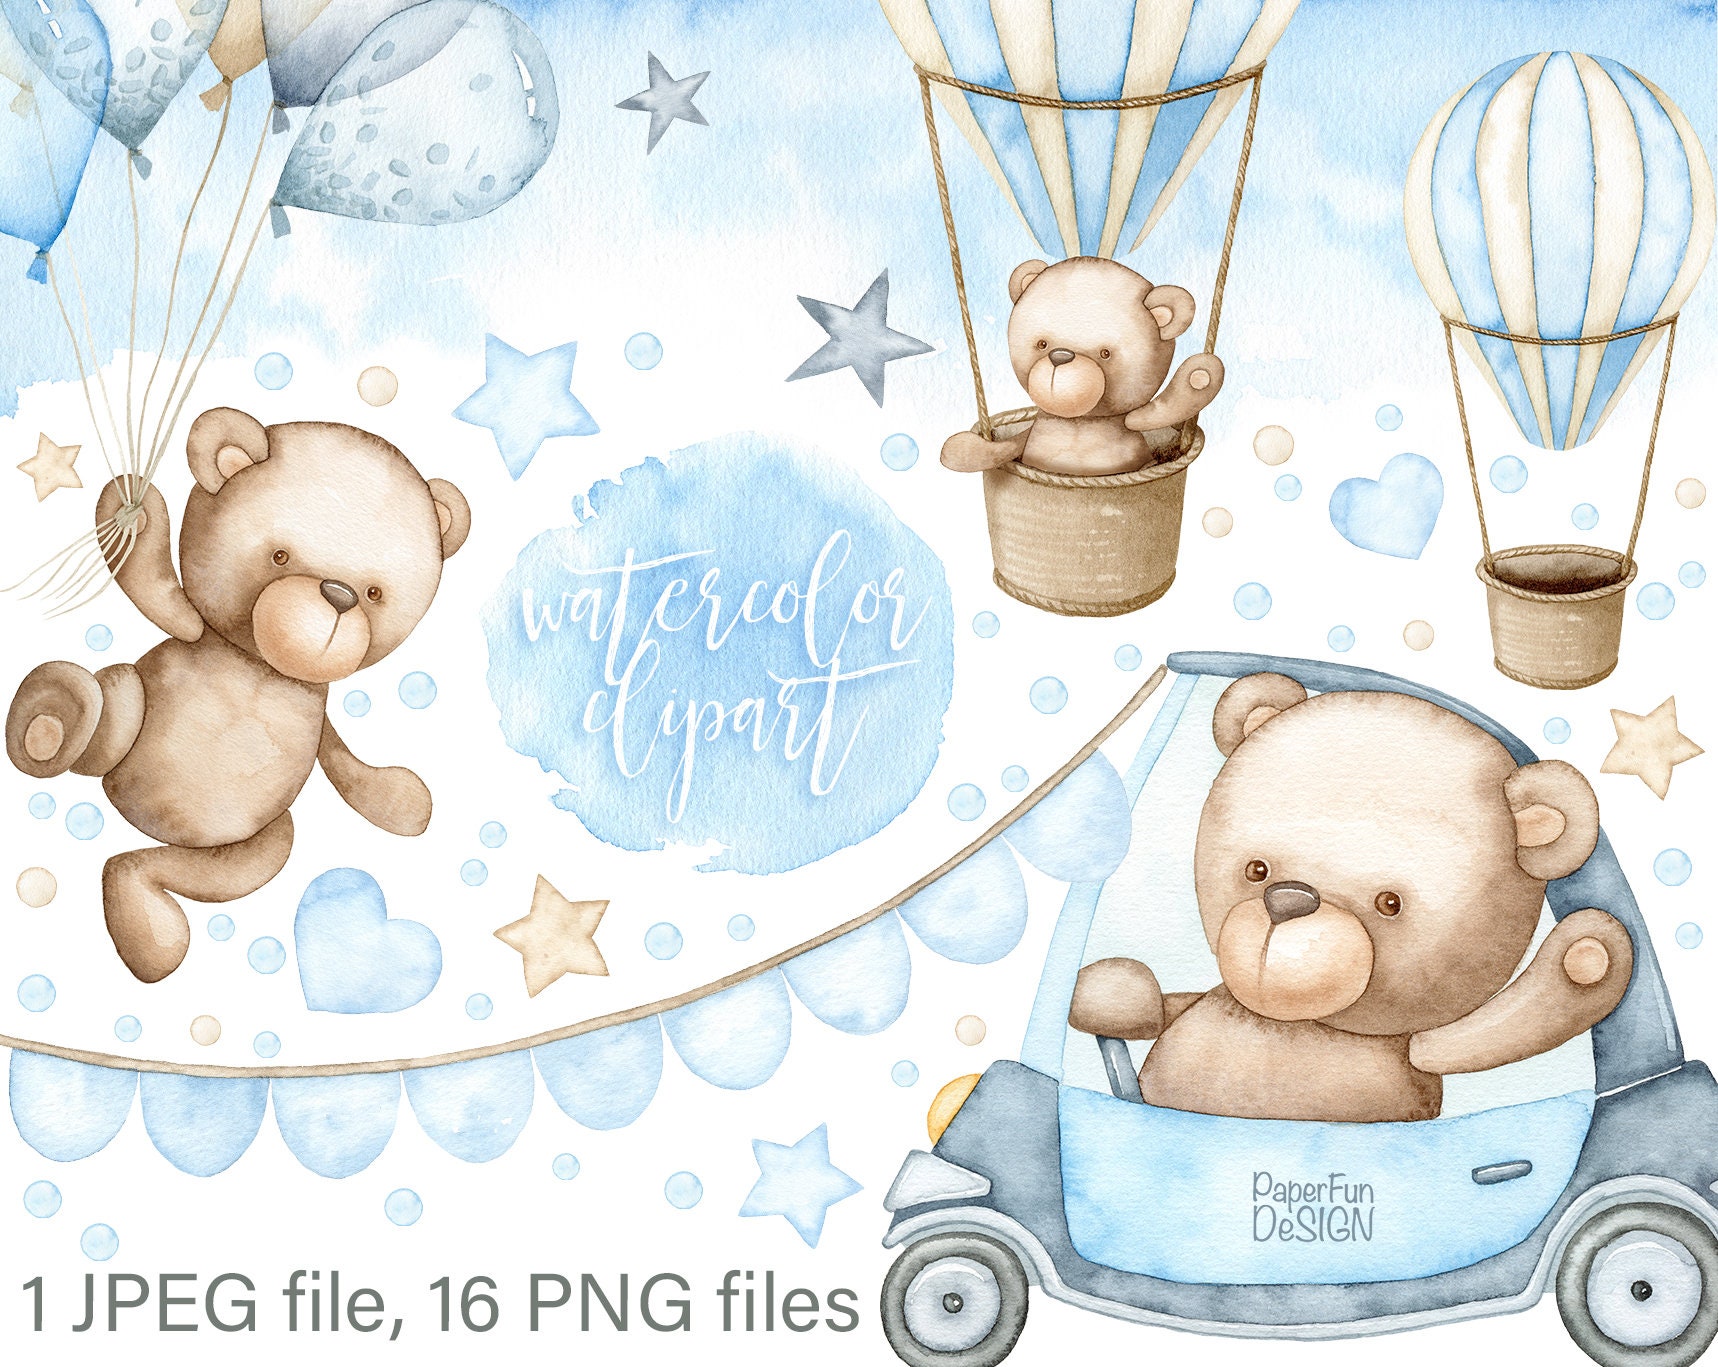 Cute Teddy Bear in Watercolor Clipart Graphic by VeloonaP